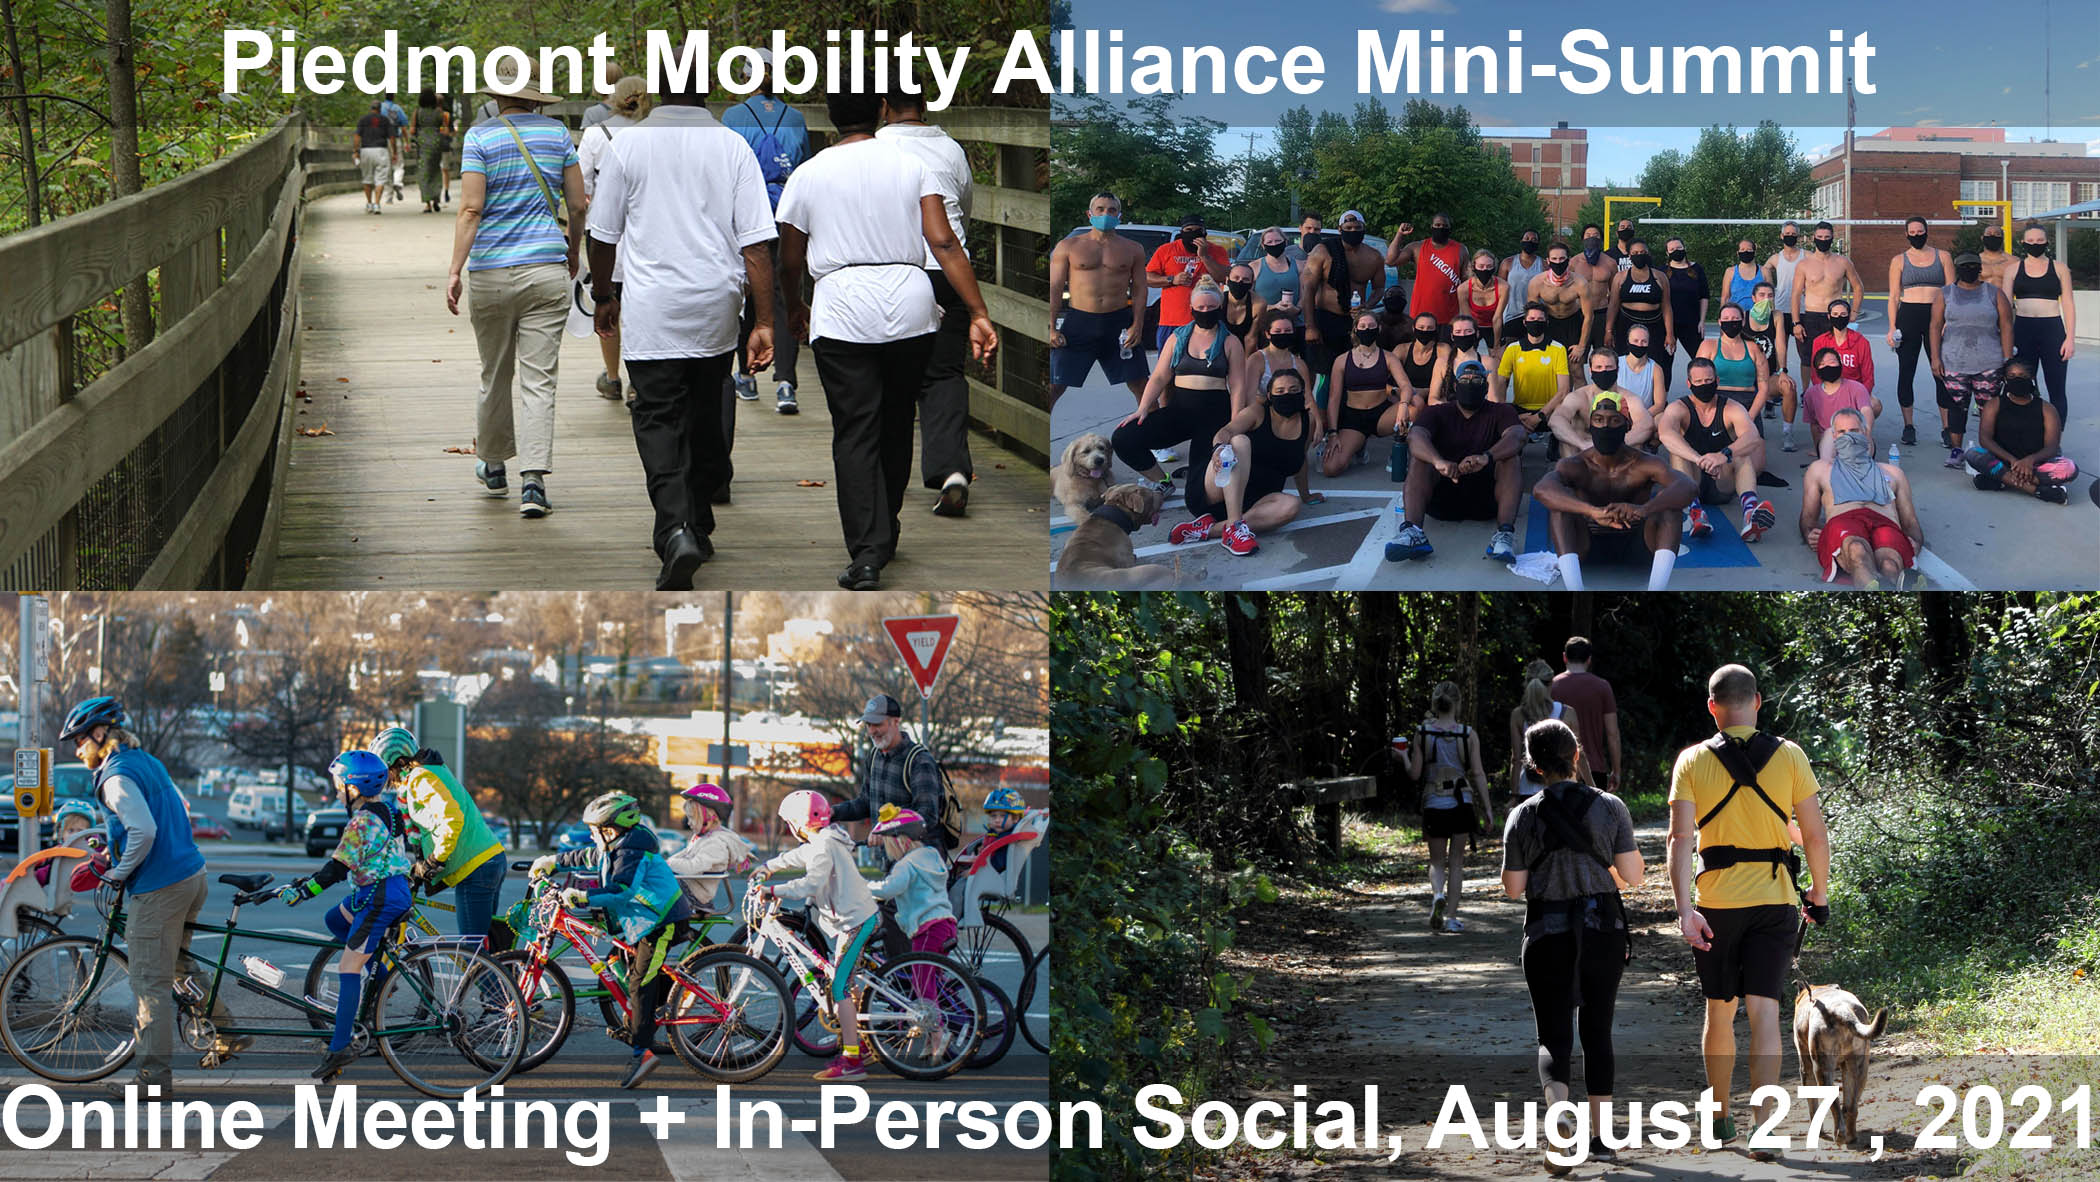 Piedmont Mobility Alliance Mini-Summit graphic with images of people outdoors